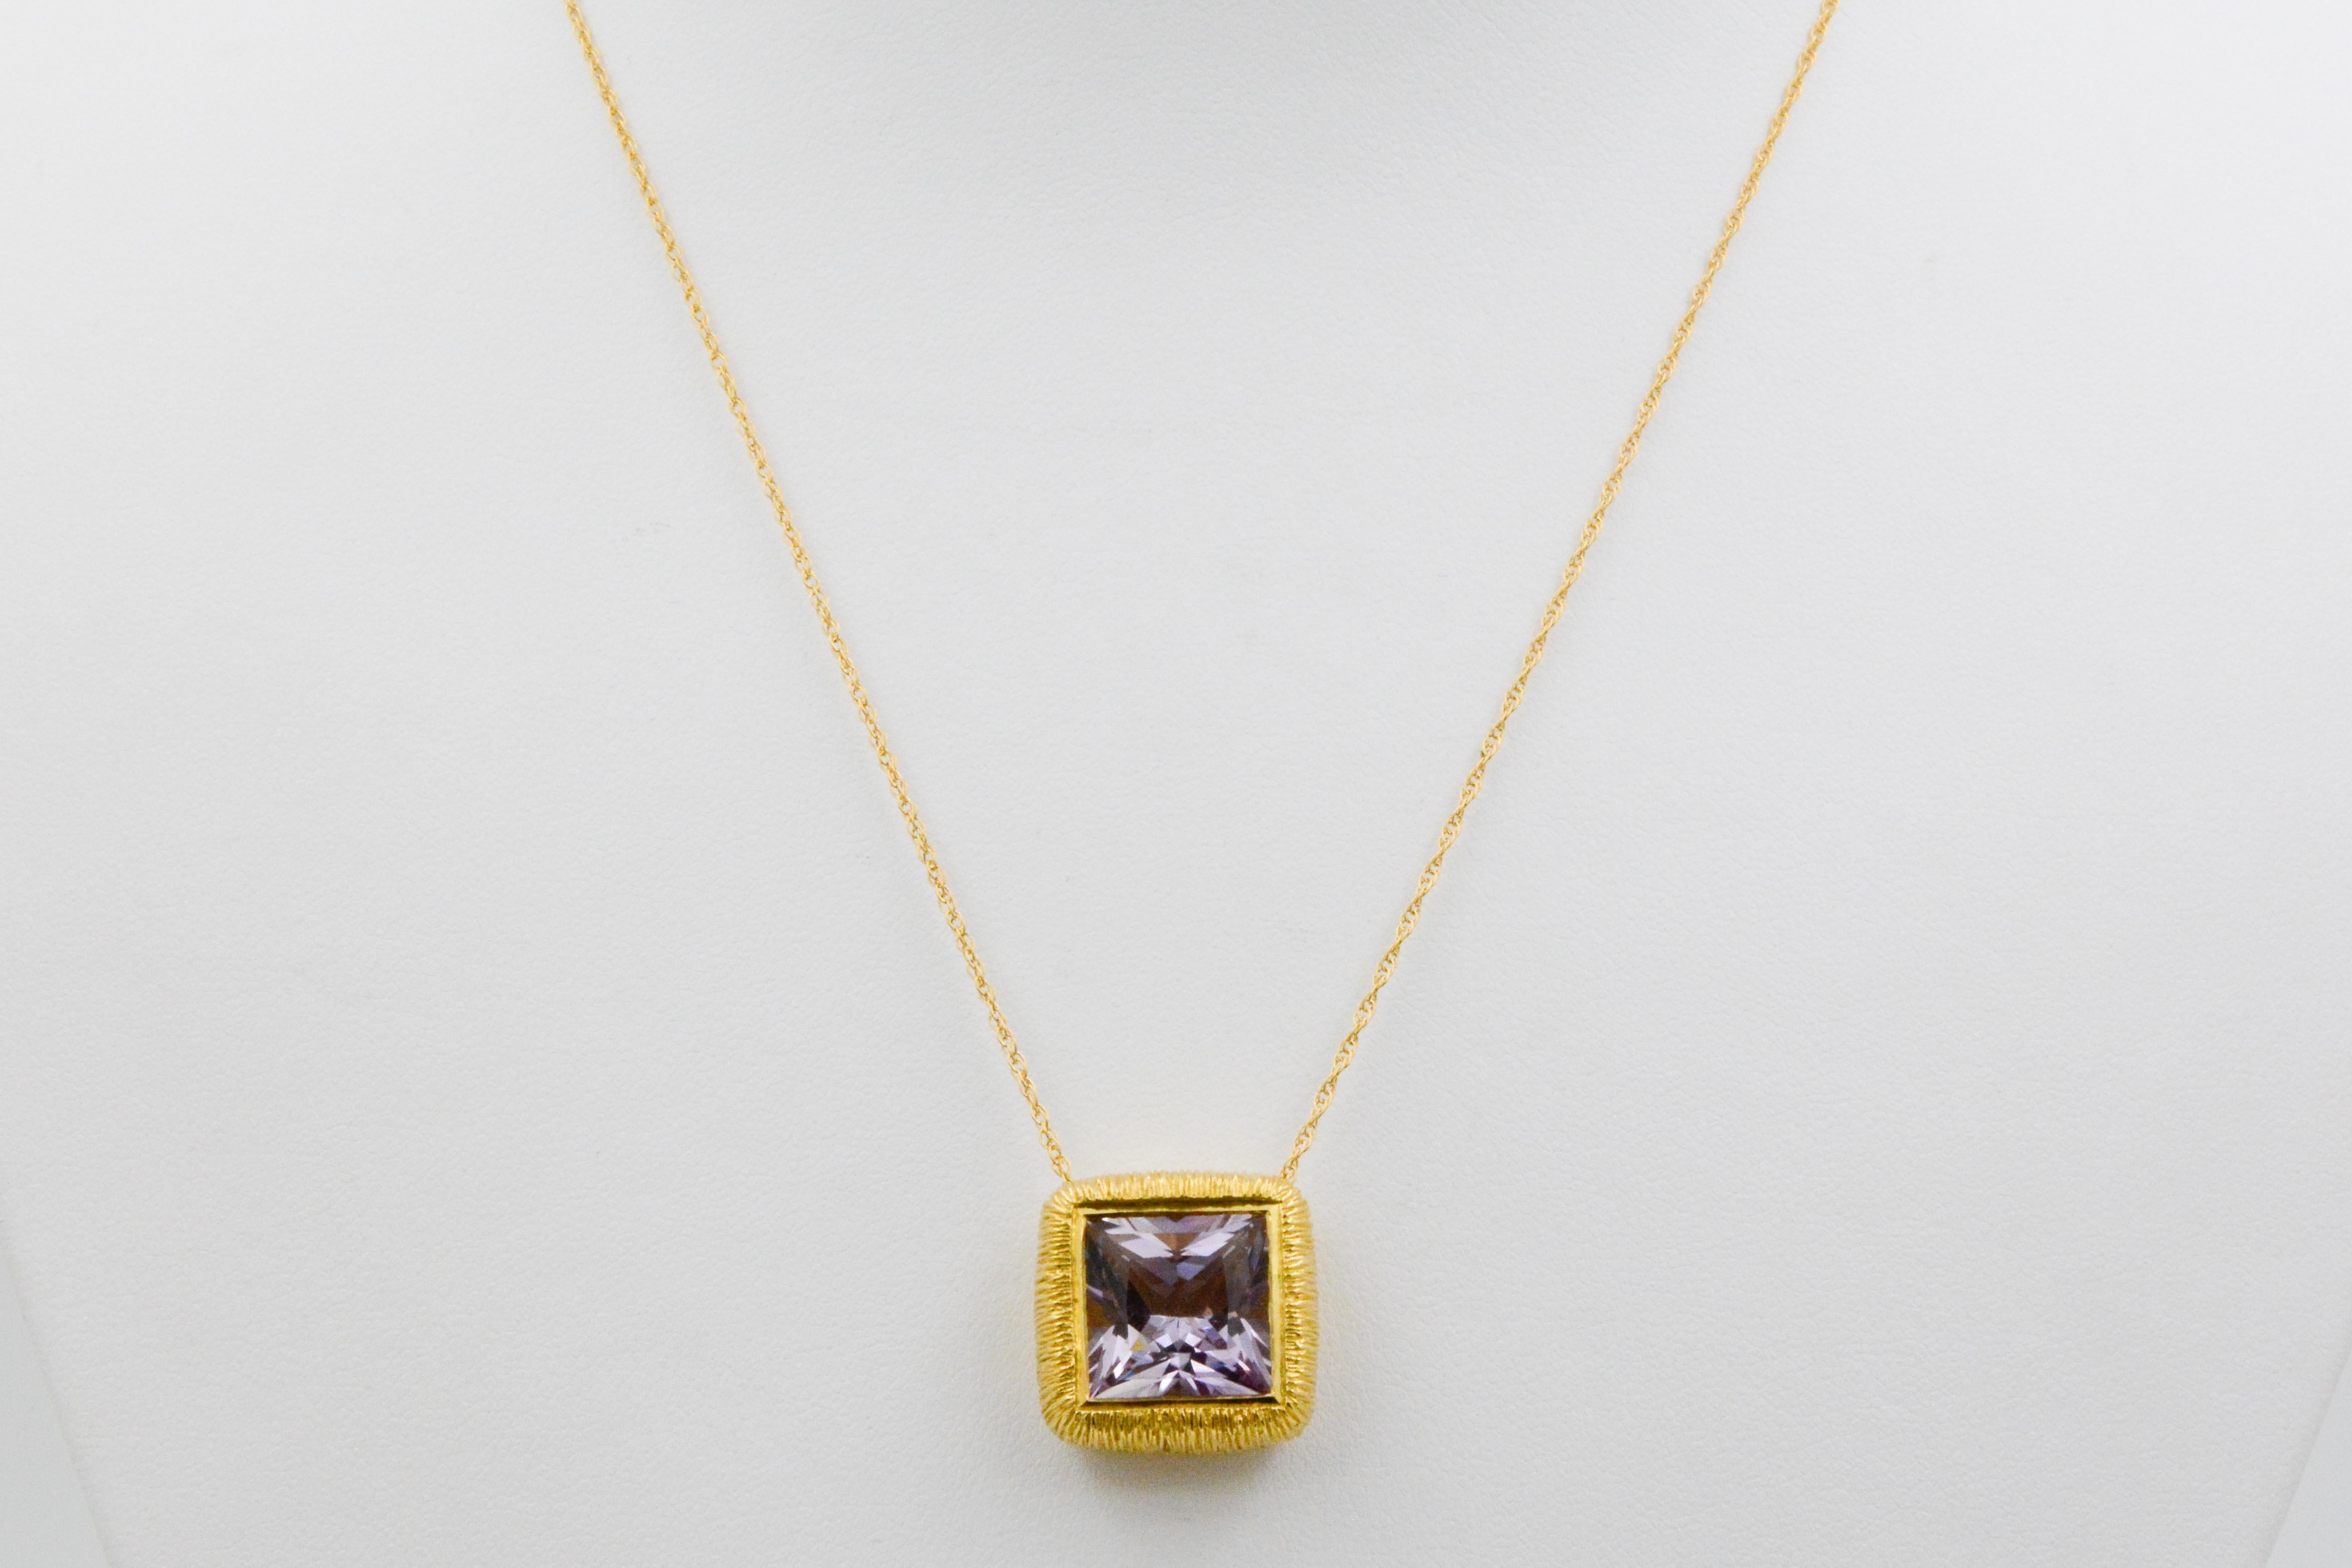 It's hip to be square if you are an 8.98 carat square brilliant cut lavender Amethyst. This exquisite Amethyst is expertly bezel set in 18 karat yellow gold with brushed grooves, and suspended on an 18 inch length chain.